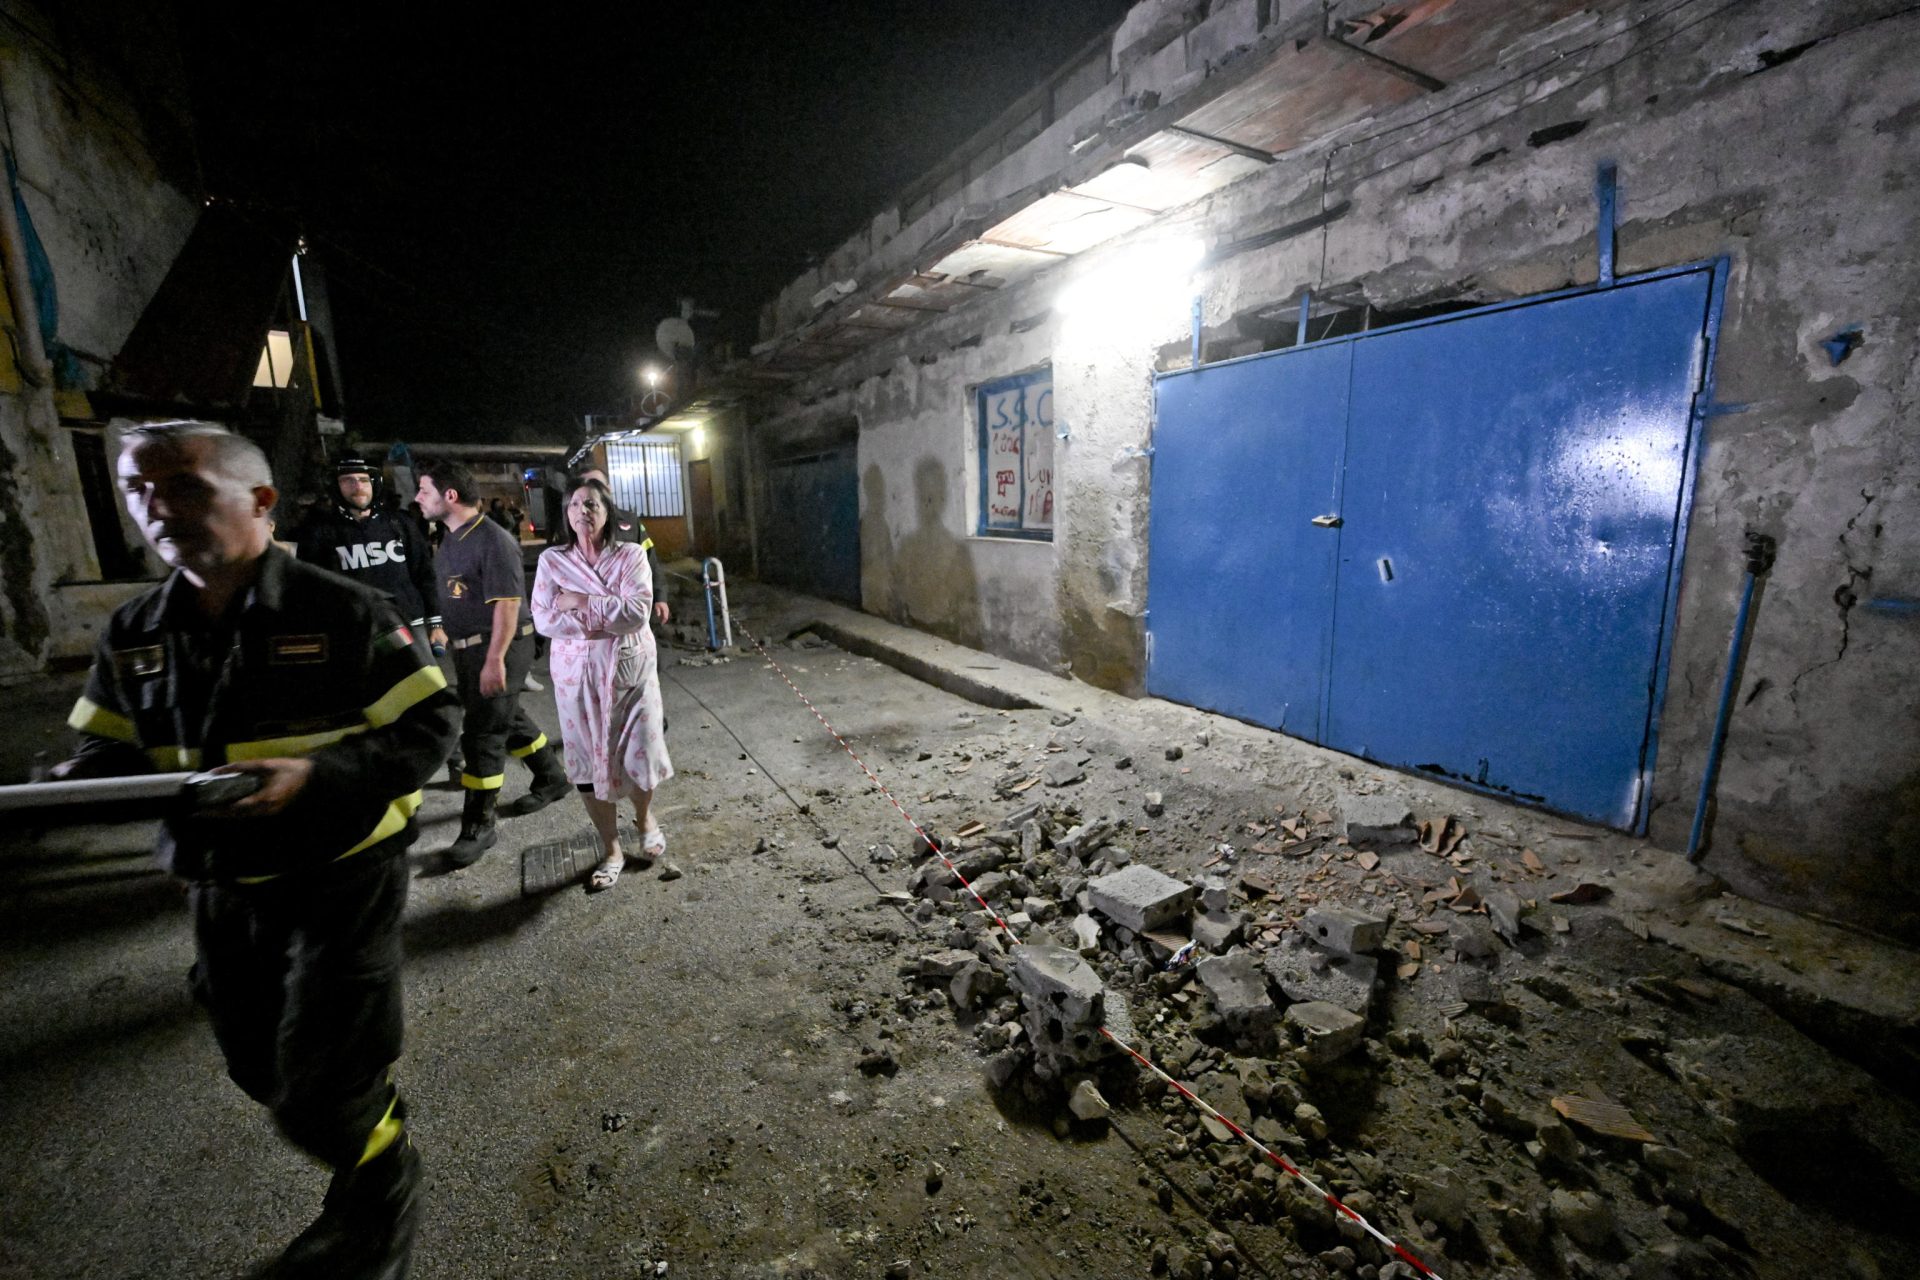 Naples (Italy), 03/10/2023.- An area with fallen rubble is cordoned off in via Pisciarelli, the epicenter of an earthquake, on the border between the municipality of Pozzuoli and Agnano, a hamlet of Naples, Italy, 03 October 2023. A 4.0-magnitude earthquake hit on late 02 October the Campi Flegrei, which has heightened concern among people living in the volcanic area near Naples about a recent wave of seismic activity. (Terremoto/sismo, Italia, Nápoles) EFE/EPA/CIRO FUSCO